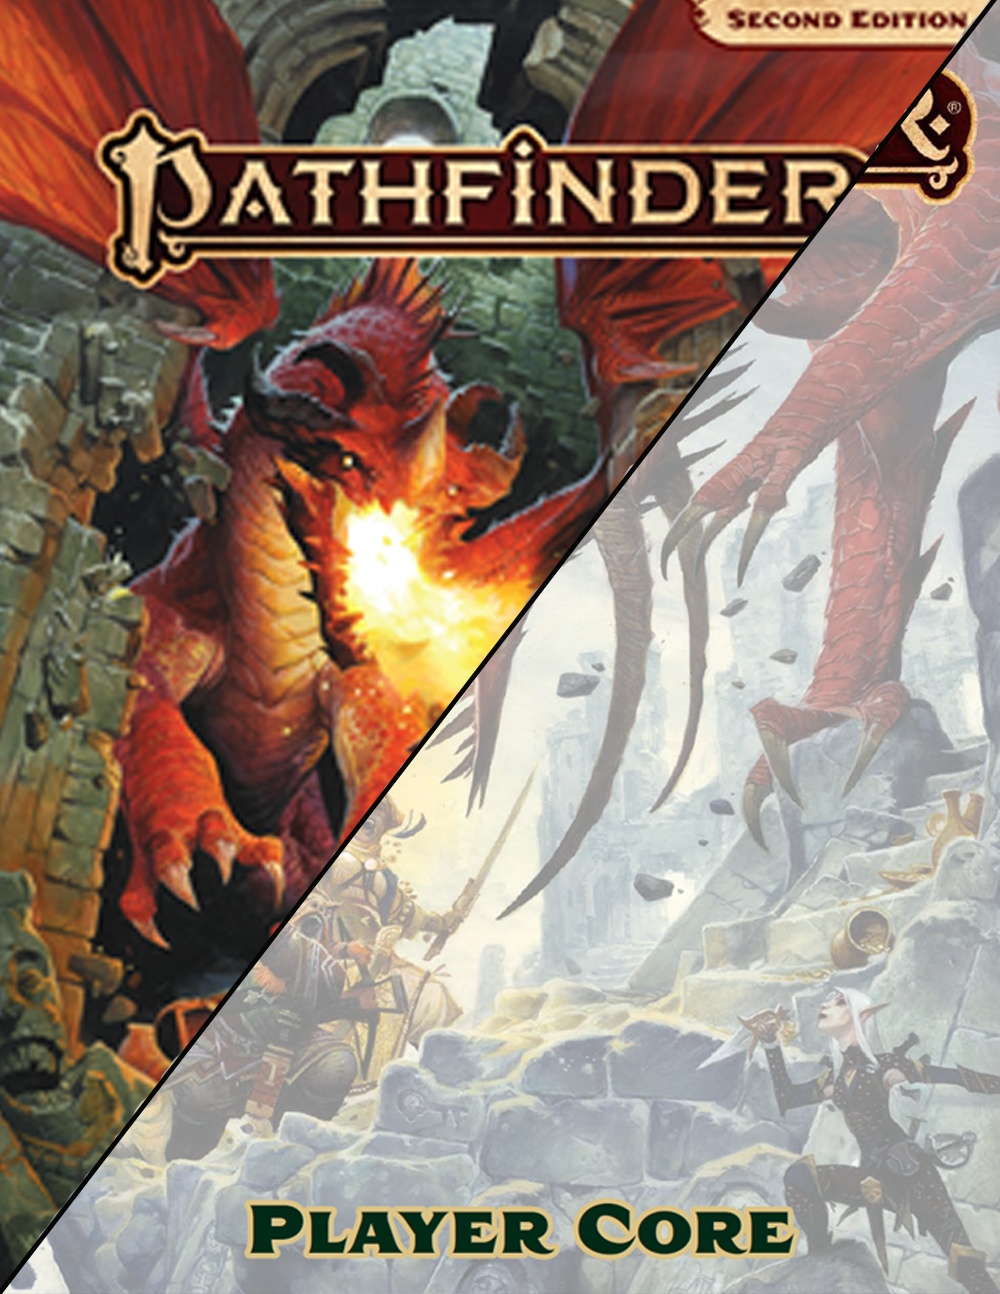 Pathfinder 2e - Exclusive preview of Treasure Vault's Game Master's Trove